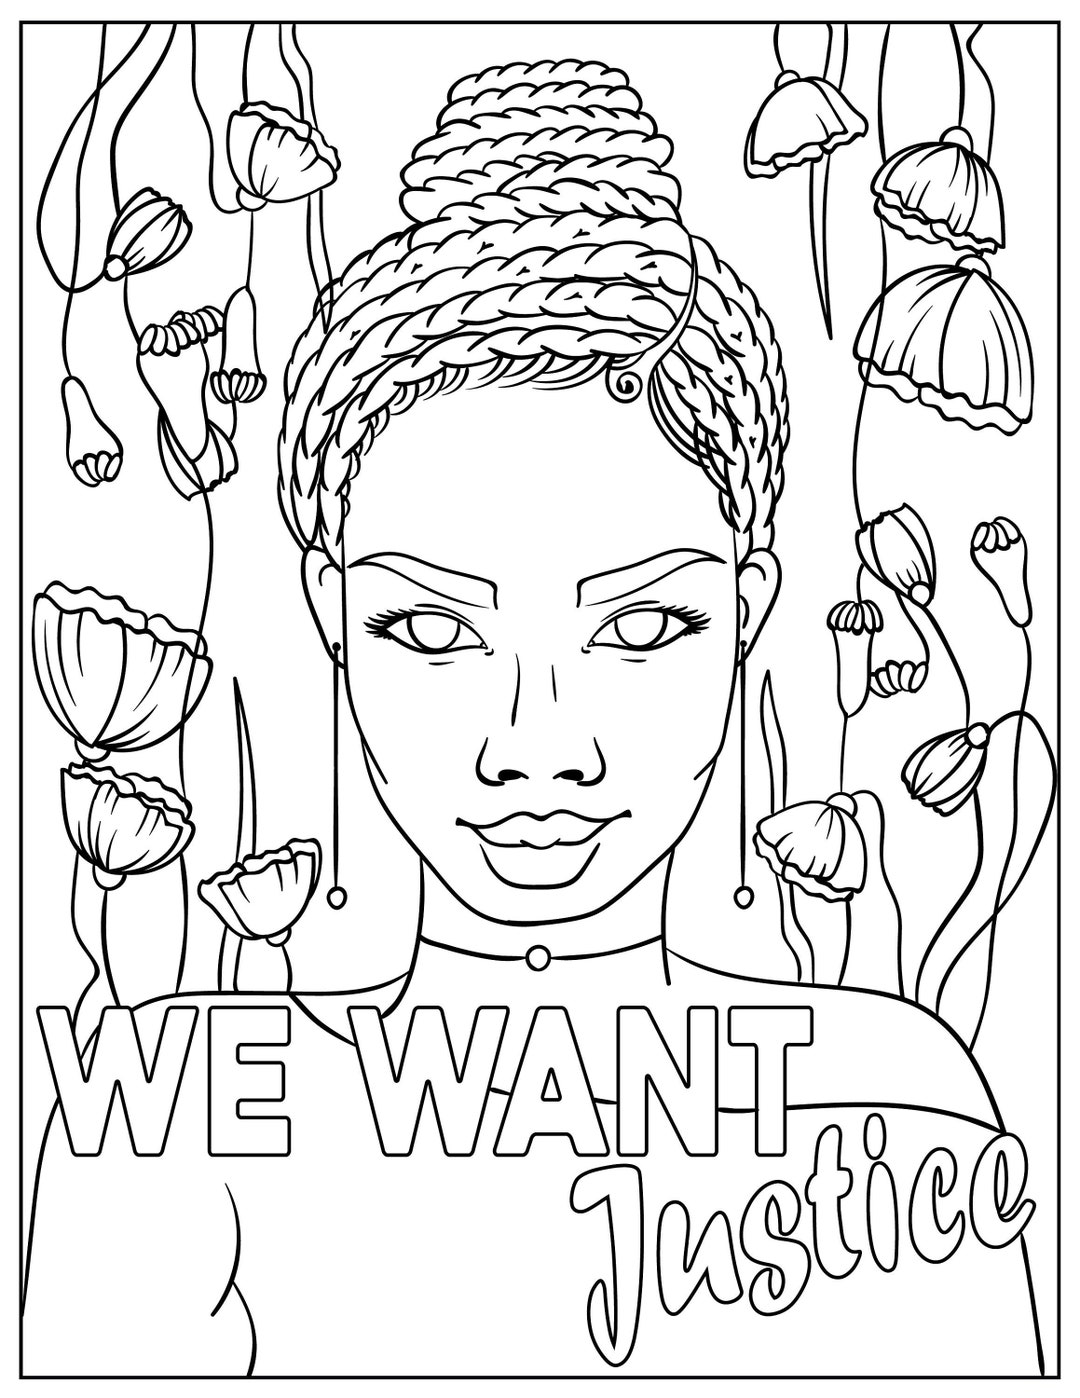 We Want Justice Coloring Page Printable Coloring Page Digital Coloring ...